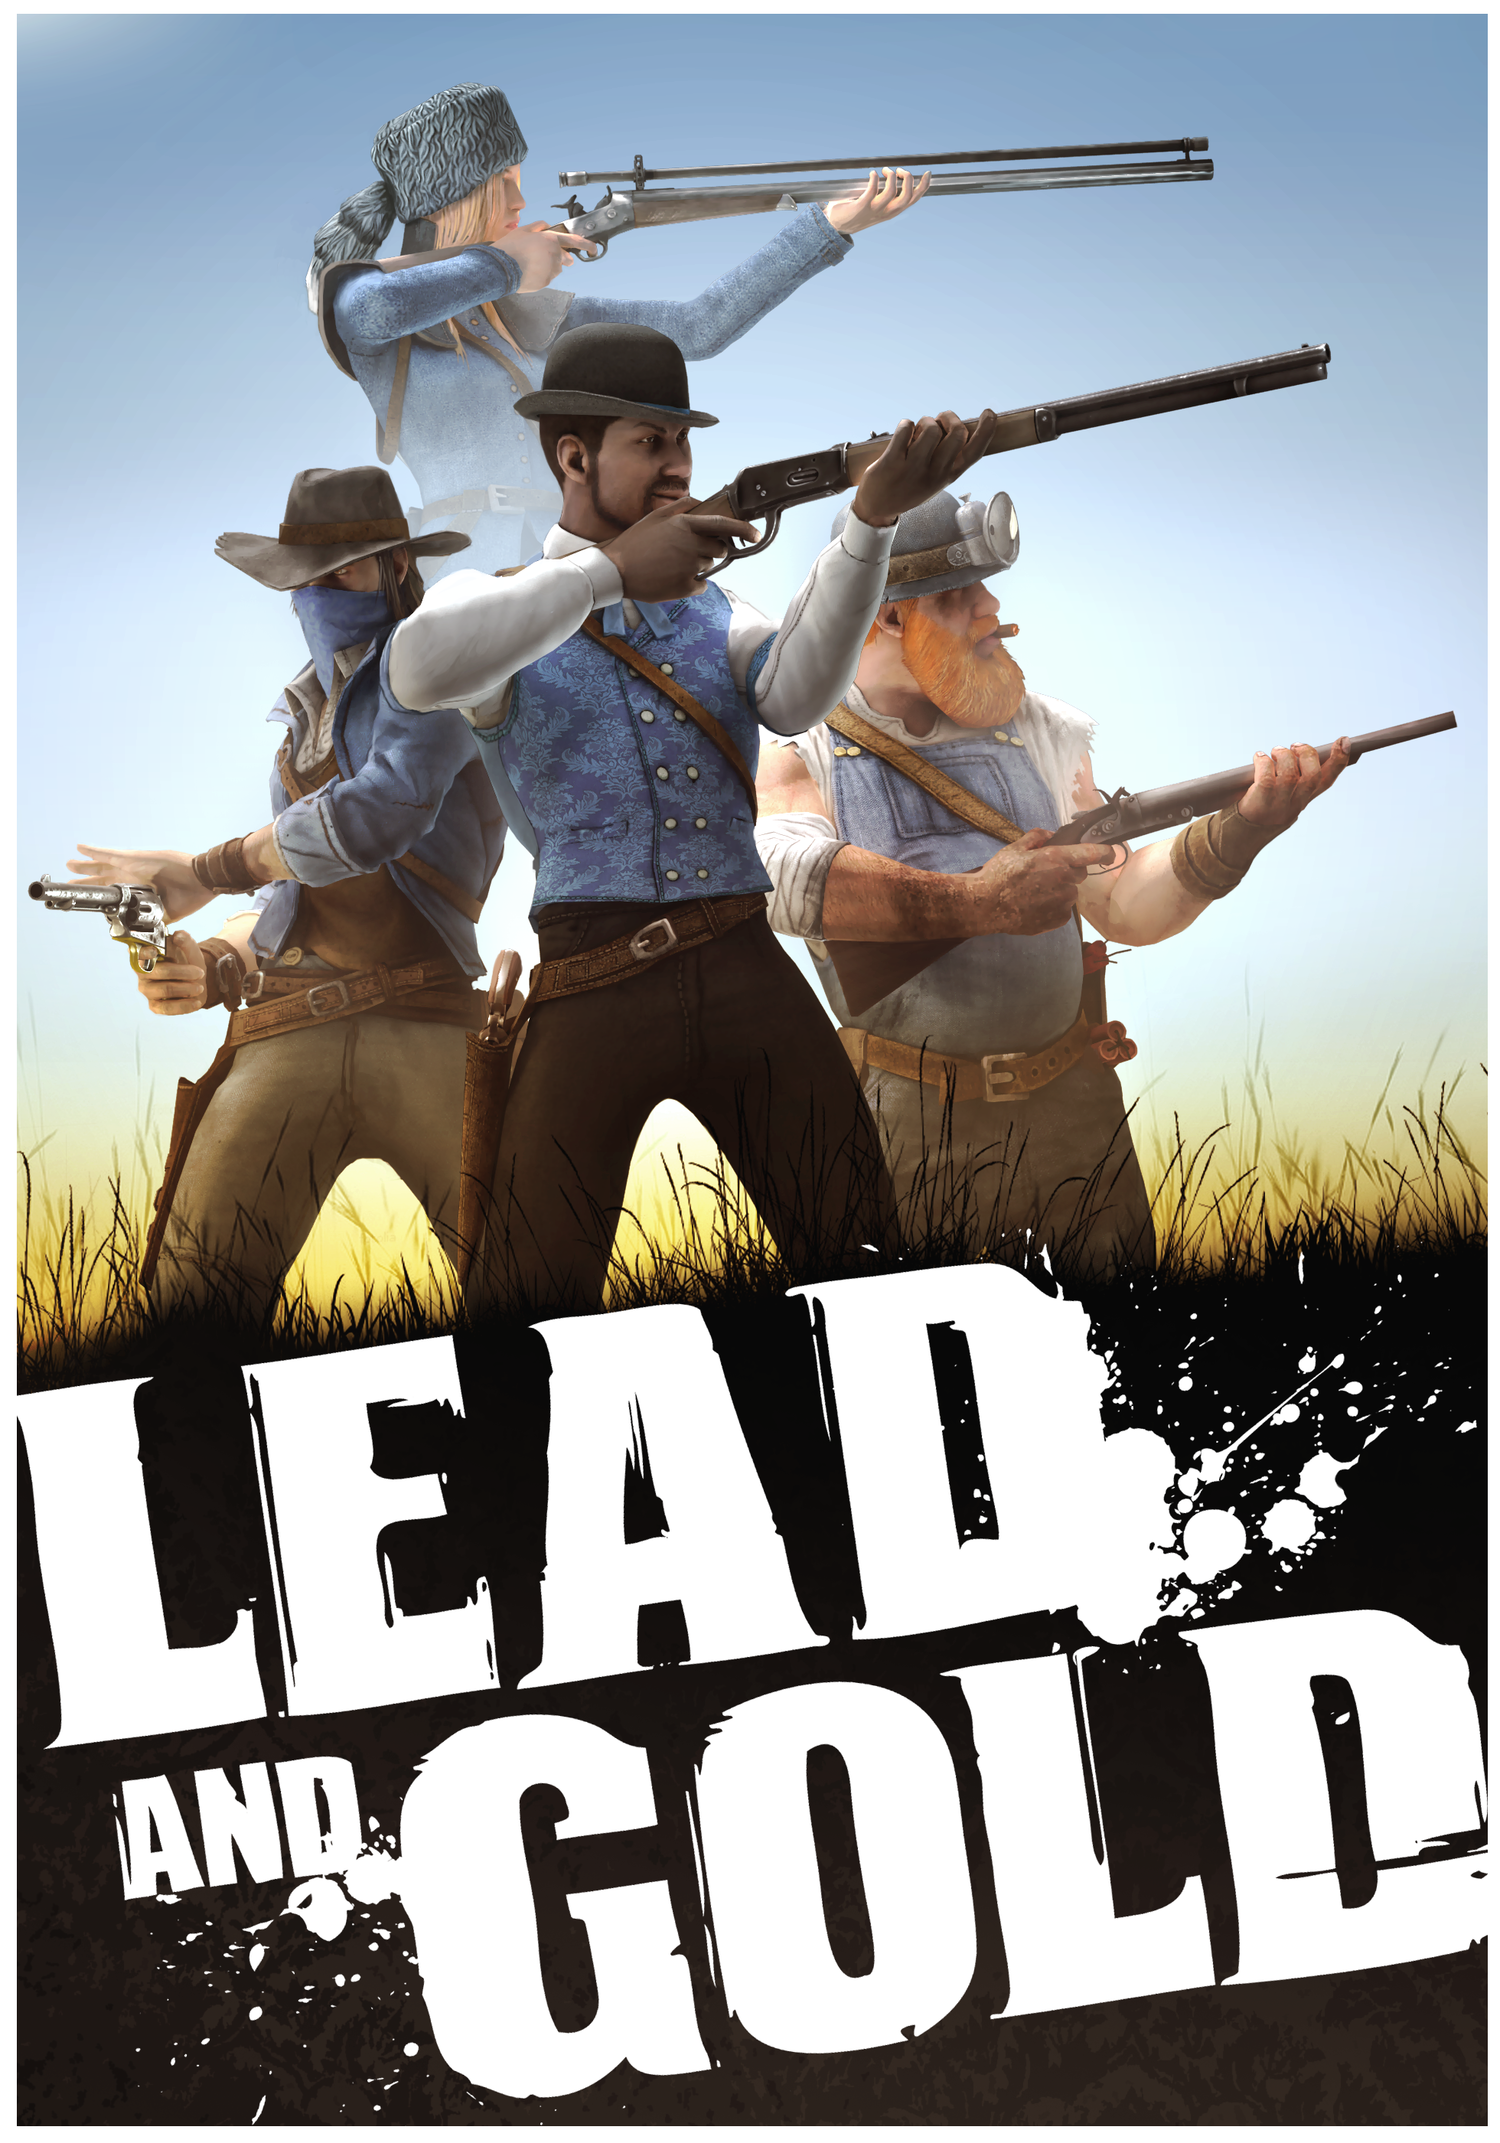 Lead and Gold: Gangs of the Wild West